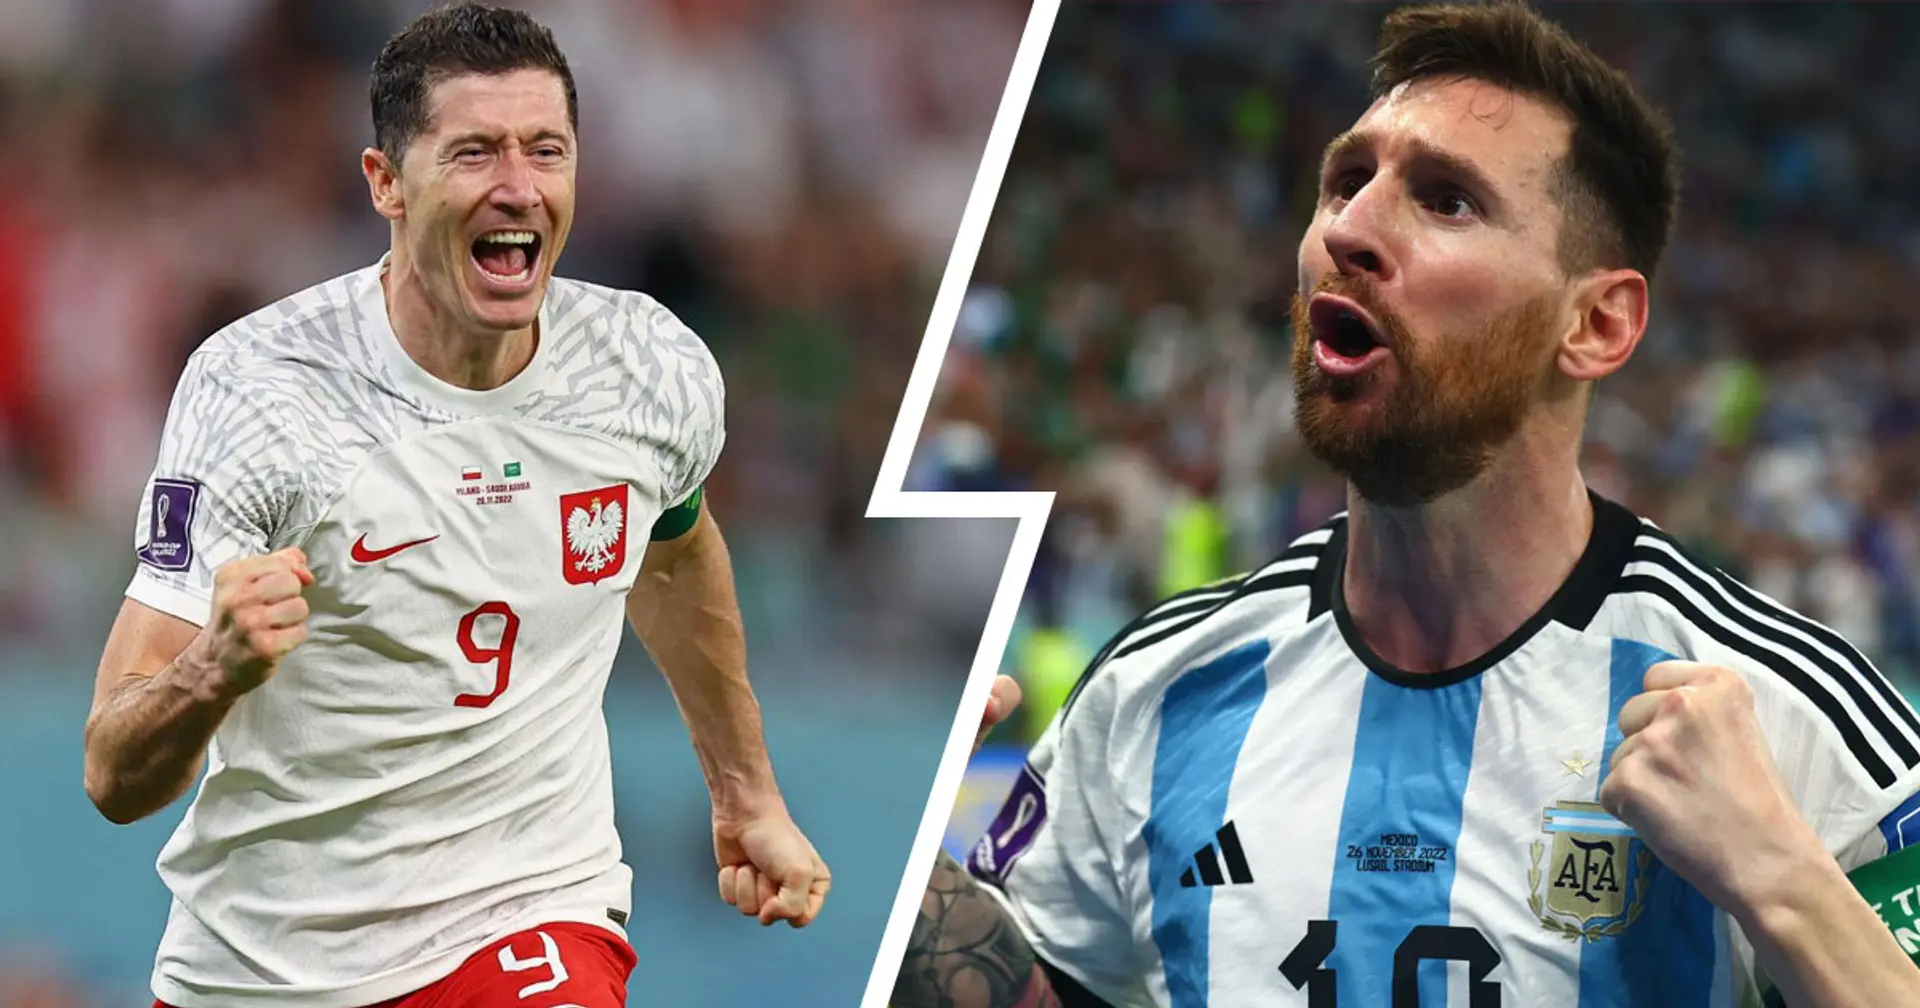 Poland vs Argentina: Official team lineups for the World Cup clash revealed